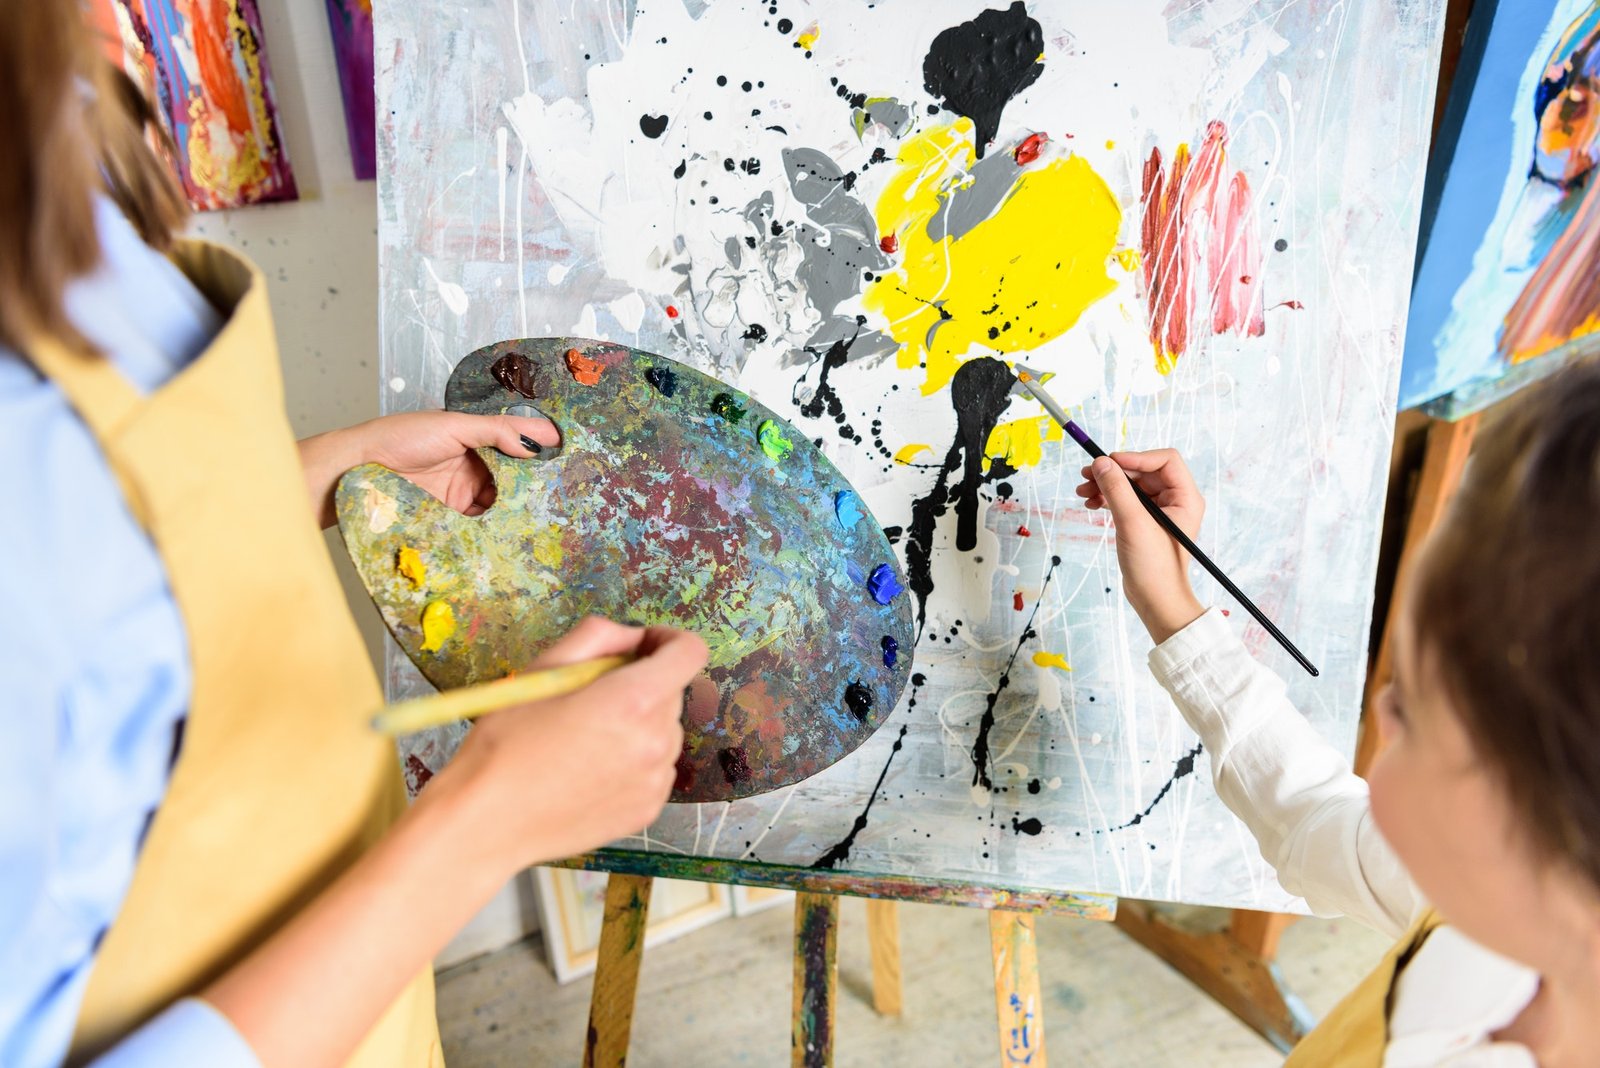 cropped-image-of-pupil-painting-on-lesson-in-workshop-of-art-school.jpg